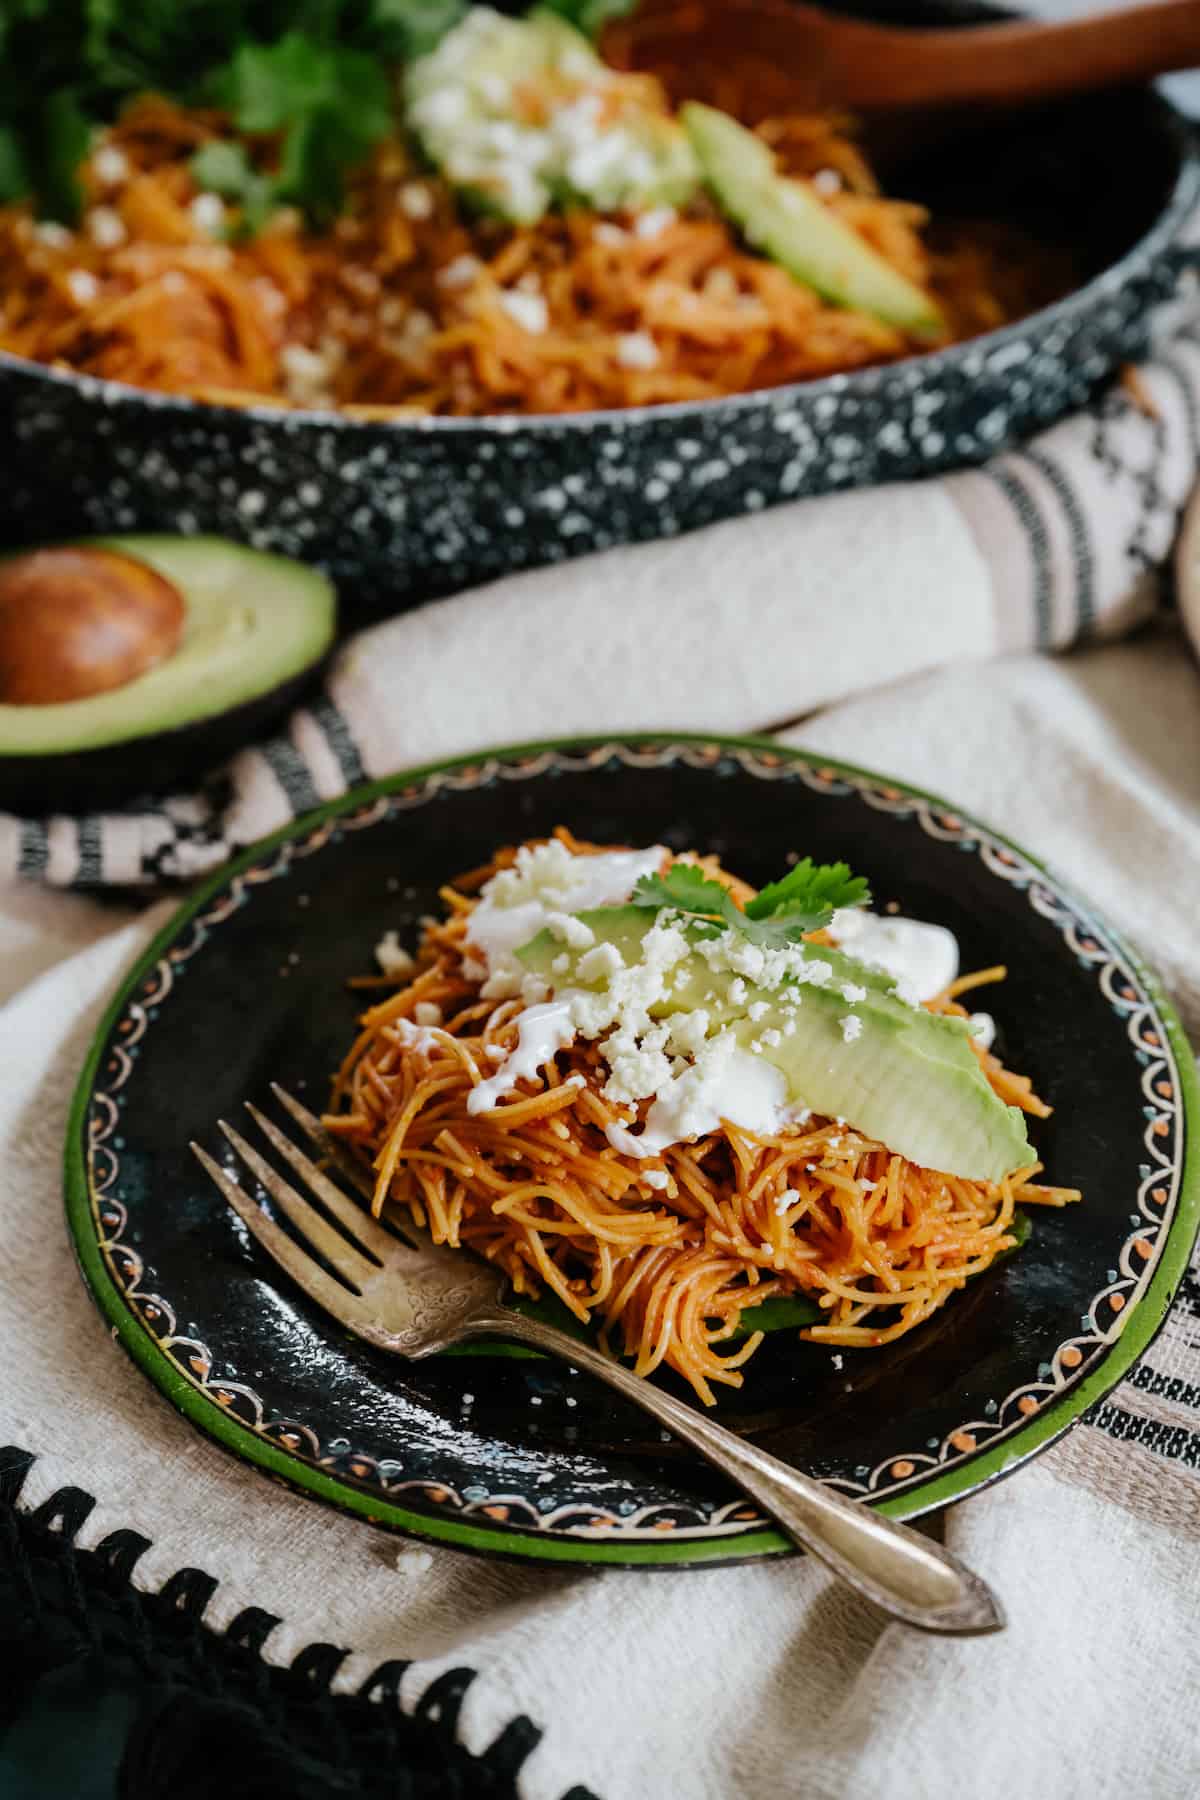 45 degree angle shot of a black plate with a green rim filled with a serving of fideo seco topped with avocado slices, a drizzle of crema, and a sprinkle of queso fresco. 